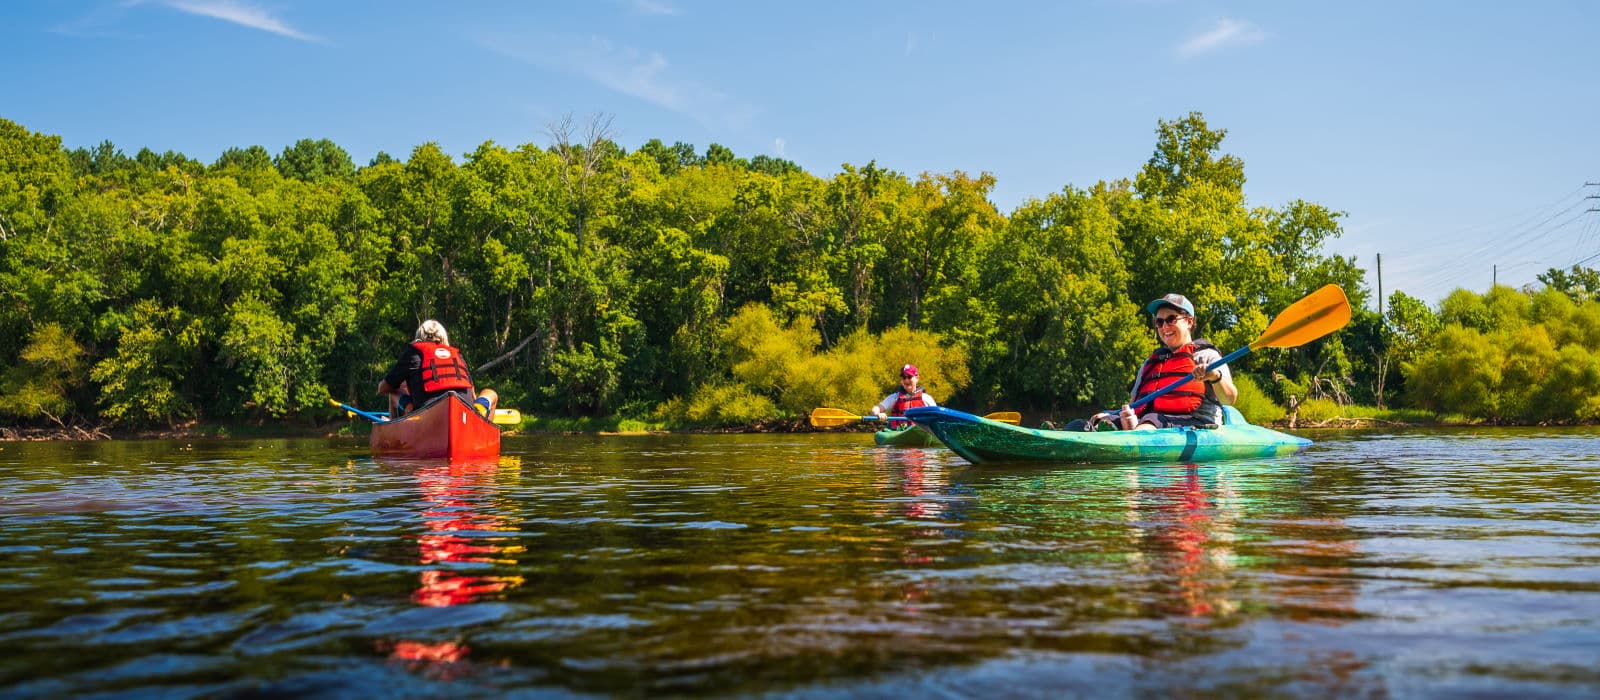 Kayakers on the Cape Fear River in Lillington, NC